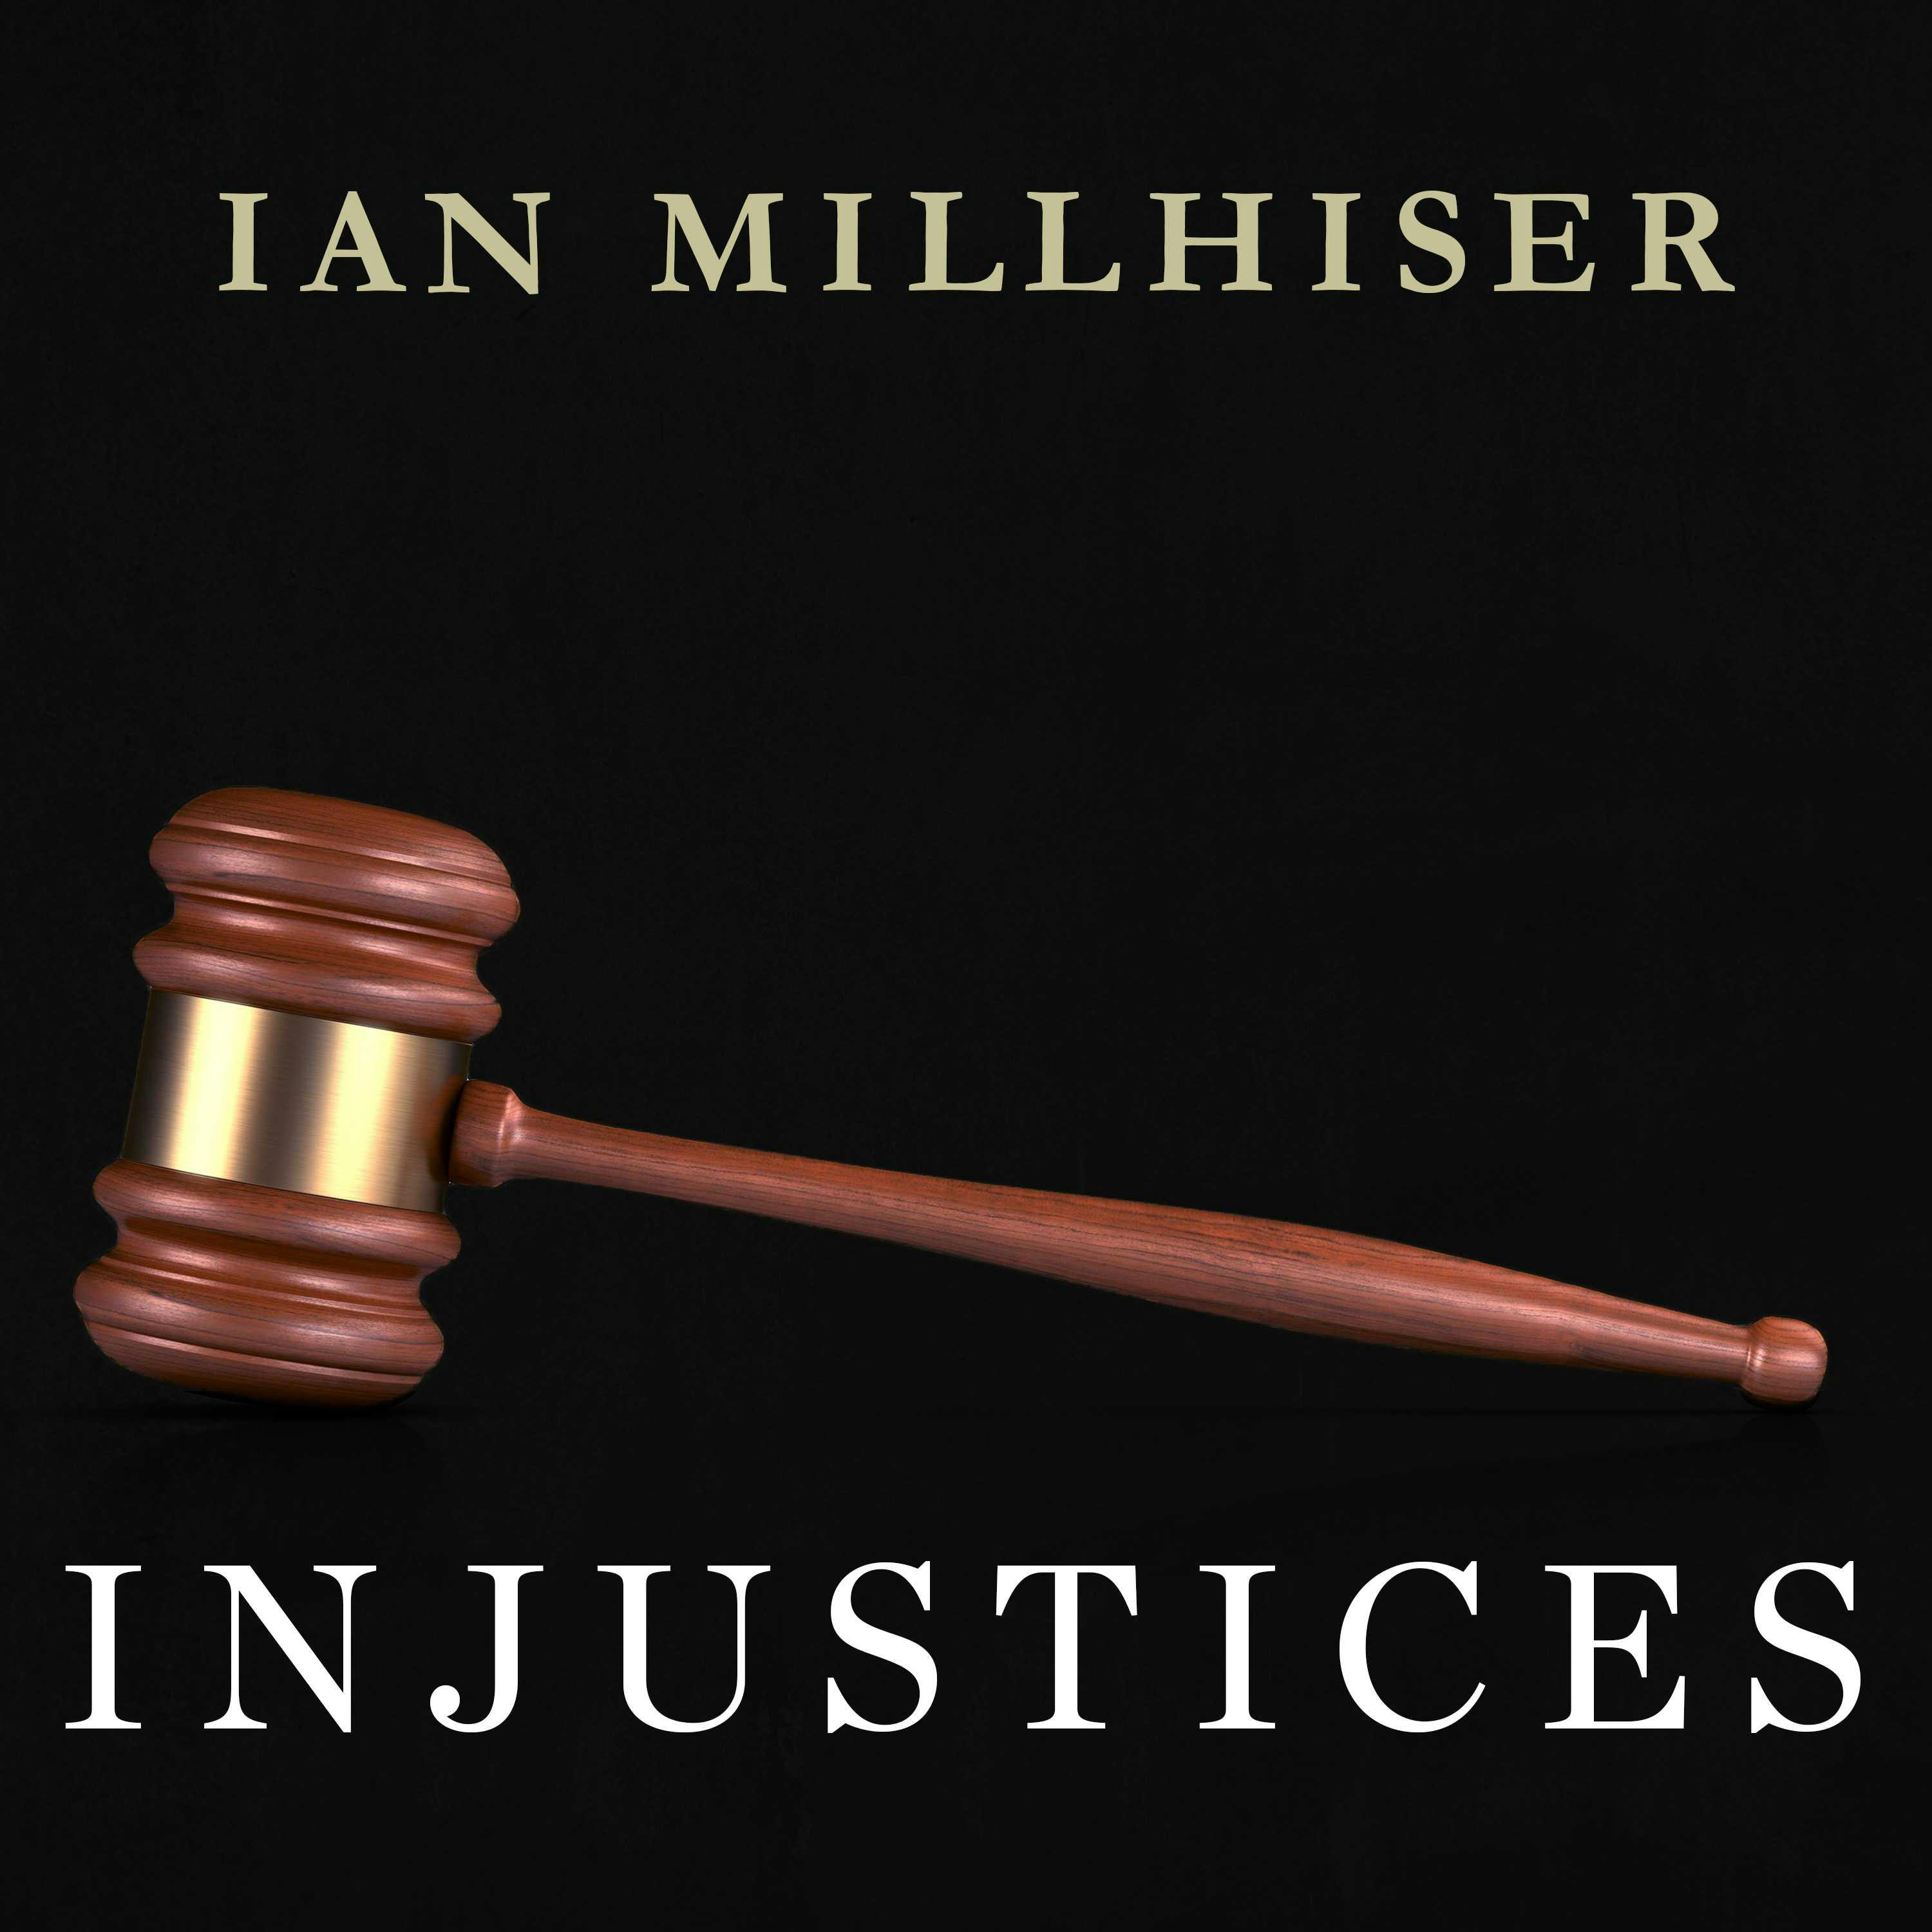 Injustices: The Supreme Court's History of Comforting the Comfortable and Afflicting the Afflicted - Ian Millhiser